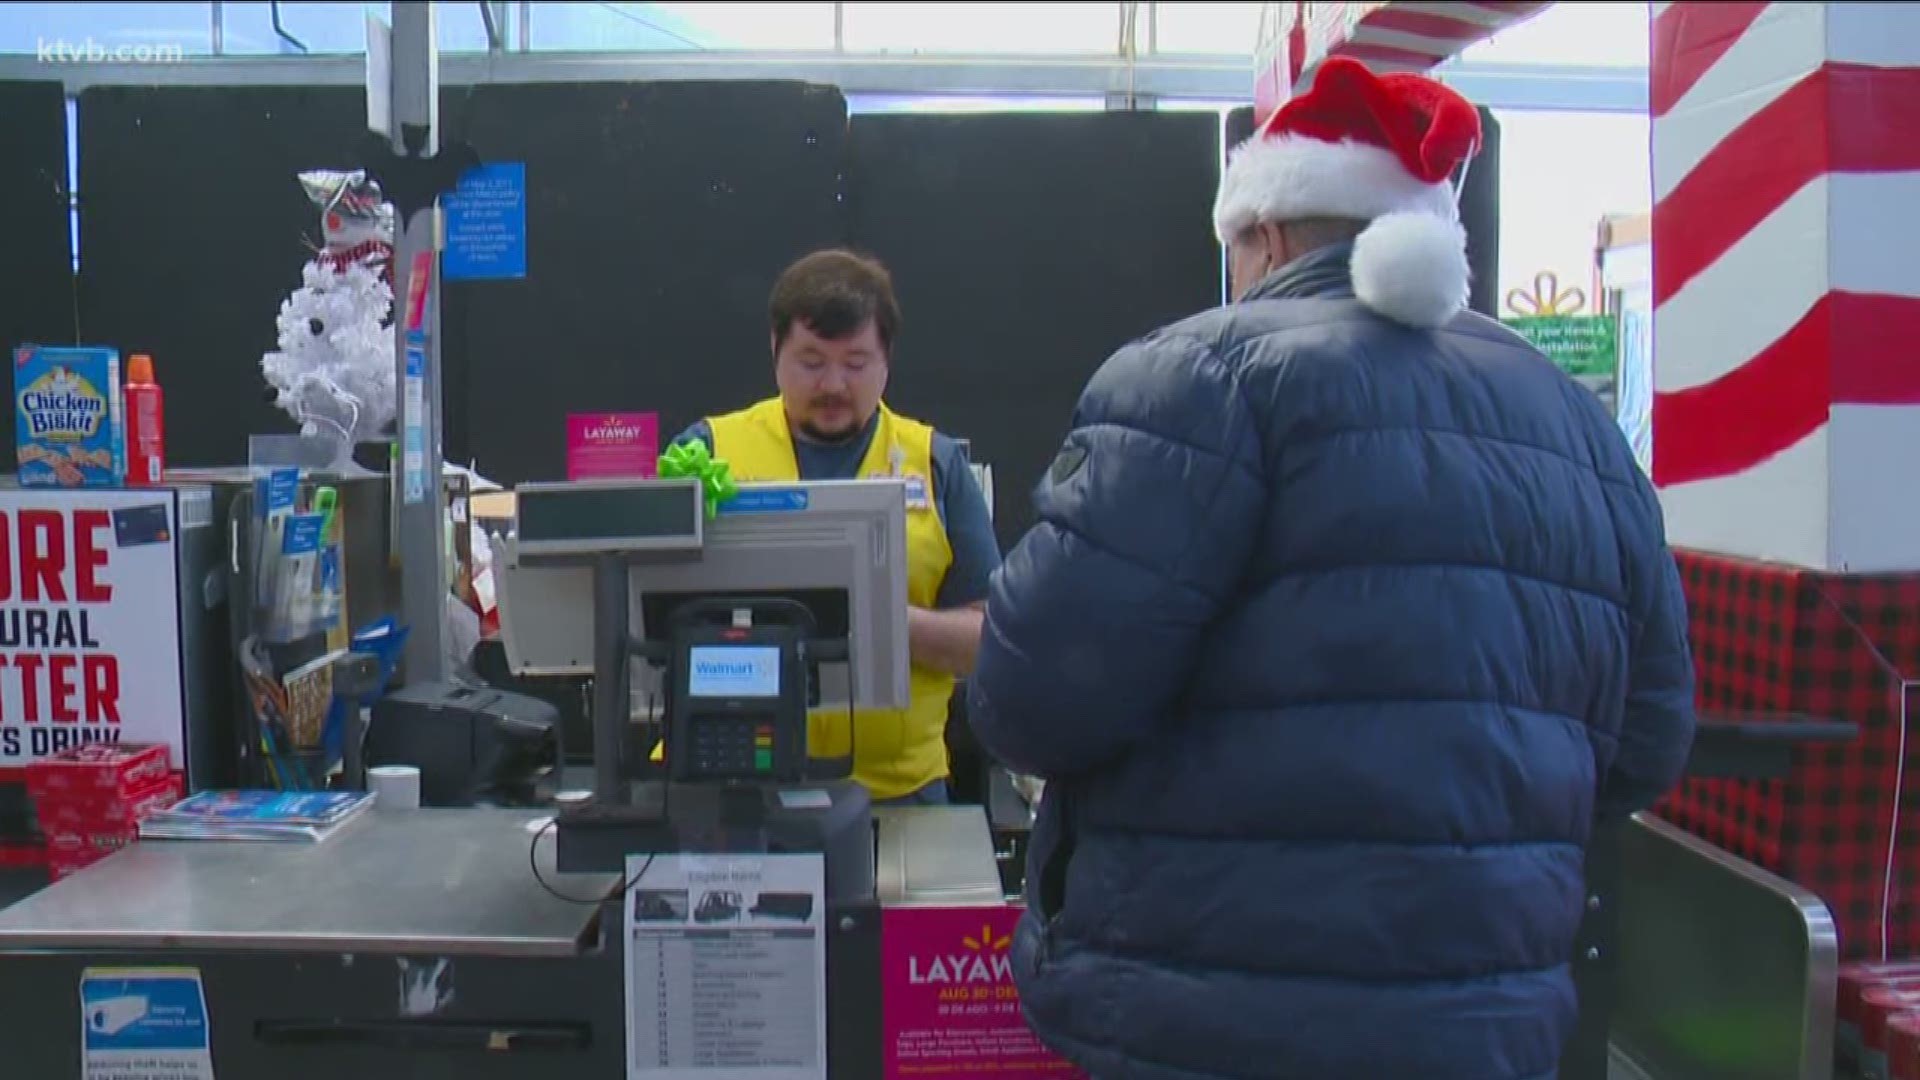 The Secret Santa has been paying off these unpaid bills for nearly a decade. He told KTVB he's paid off more than 200 bills throughout the years.